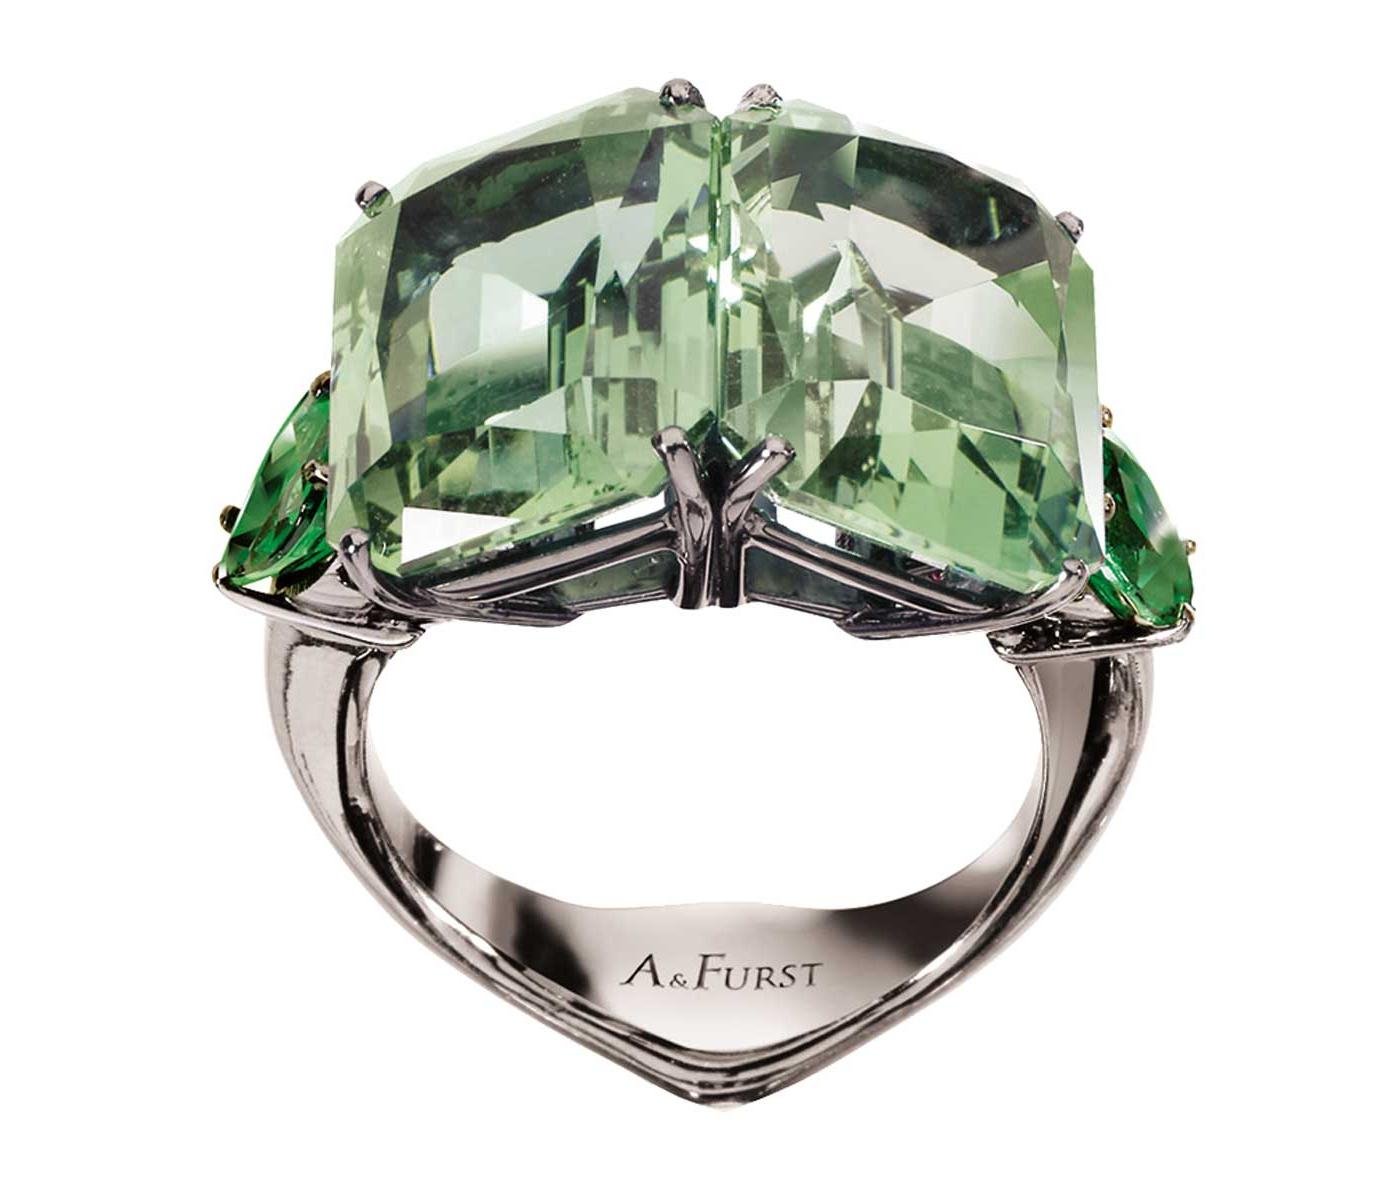 Ring by A&Furst